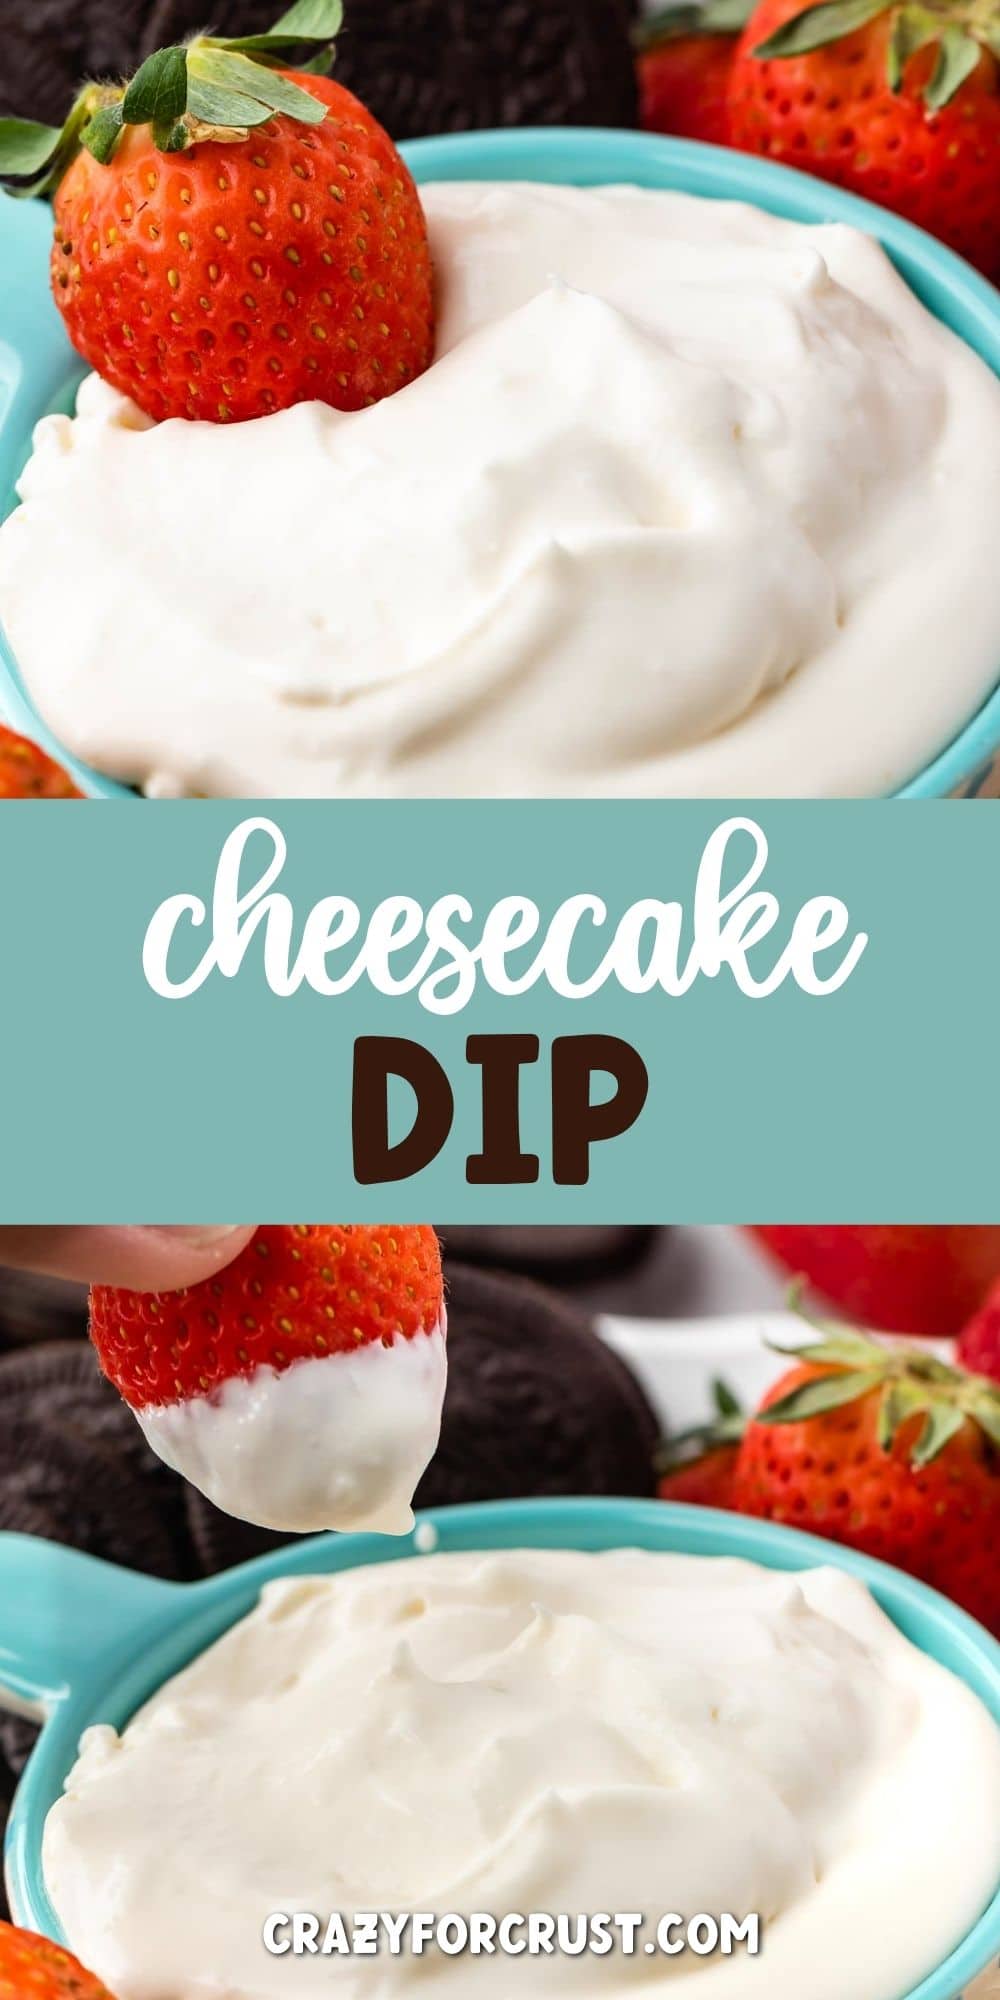 Cheesecake dip collage with recipe title in the middle of two photos